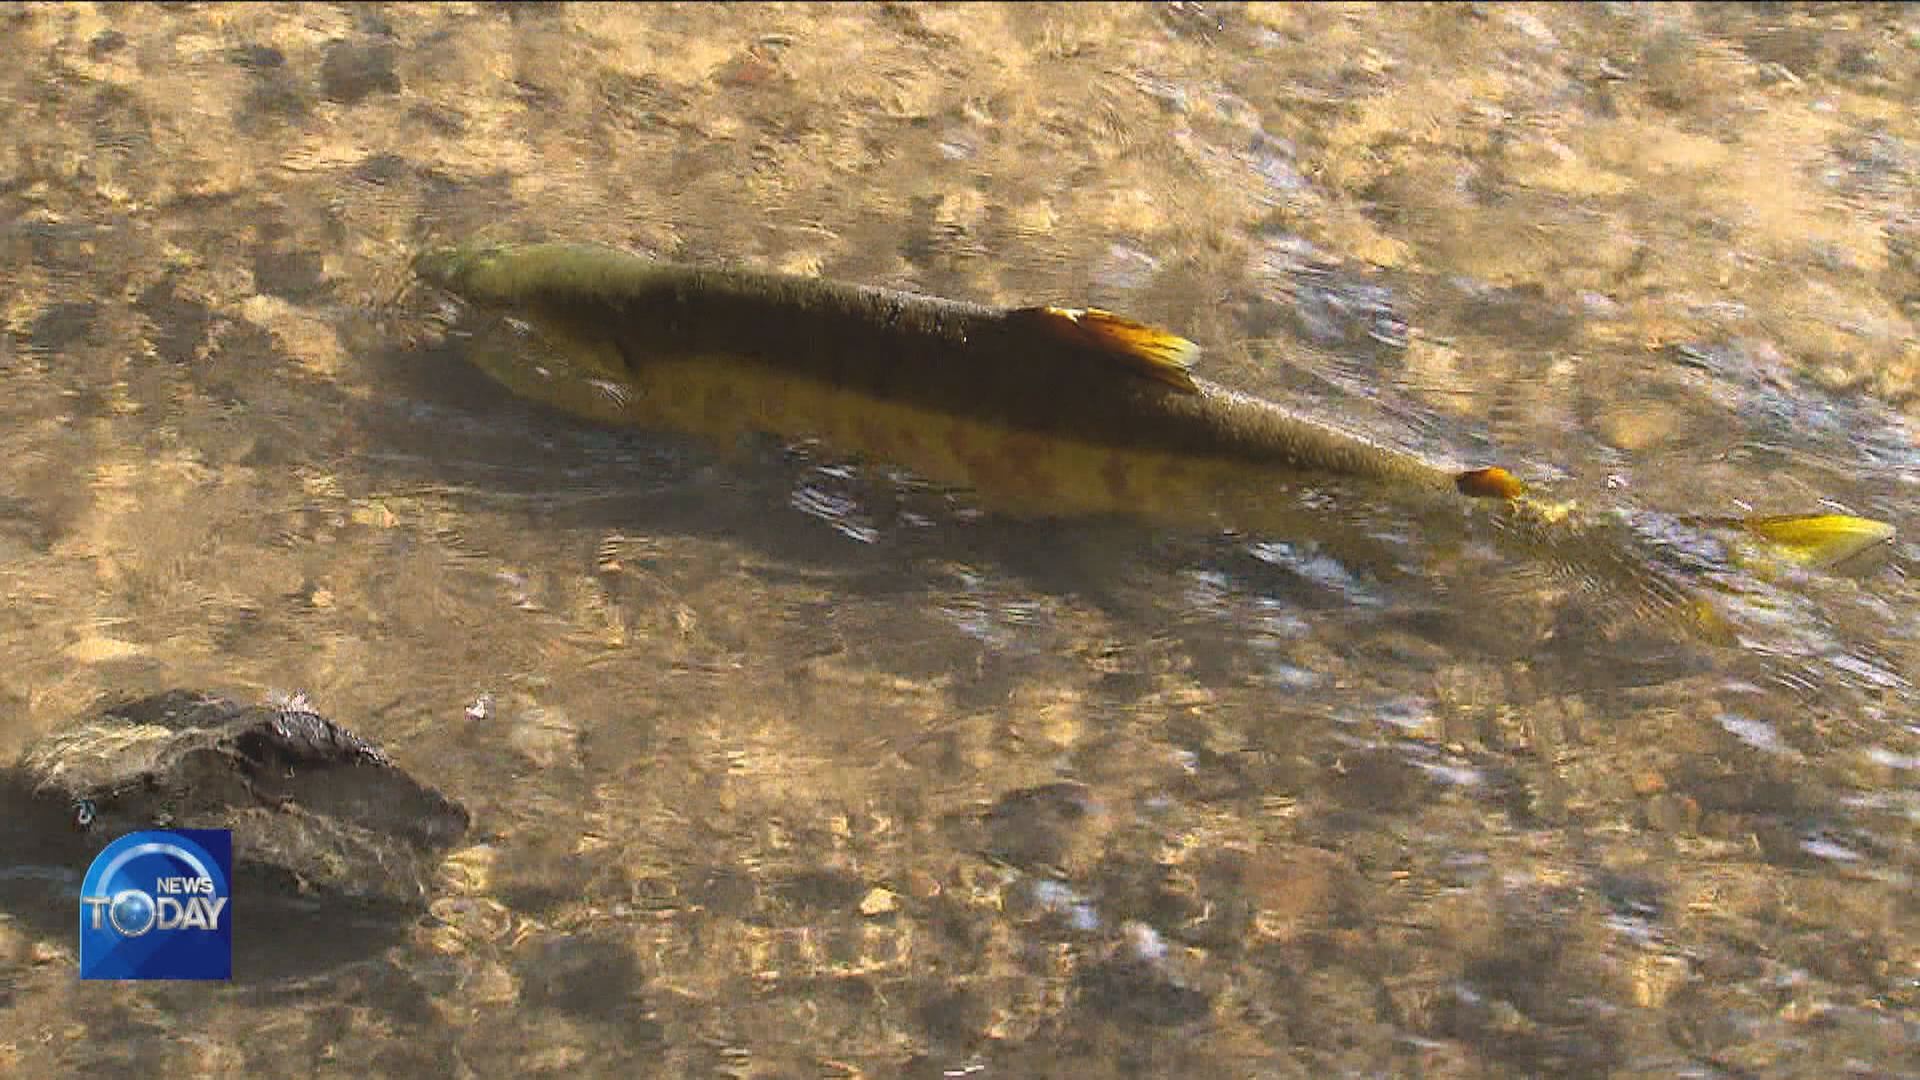 SALMON SPOTTED IN SOUTHERN CITIES